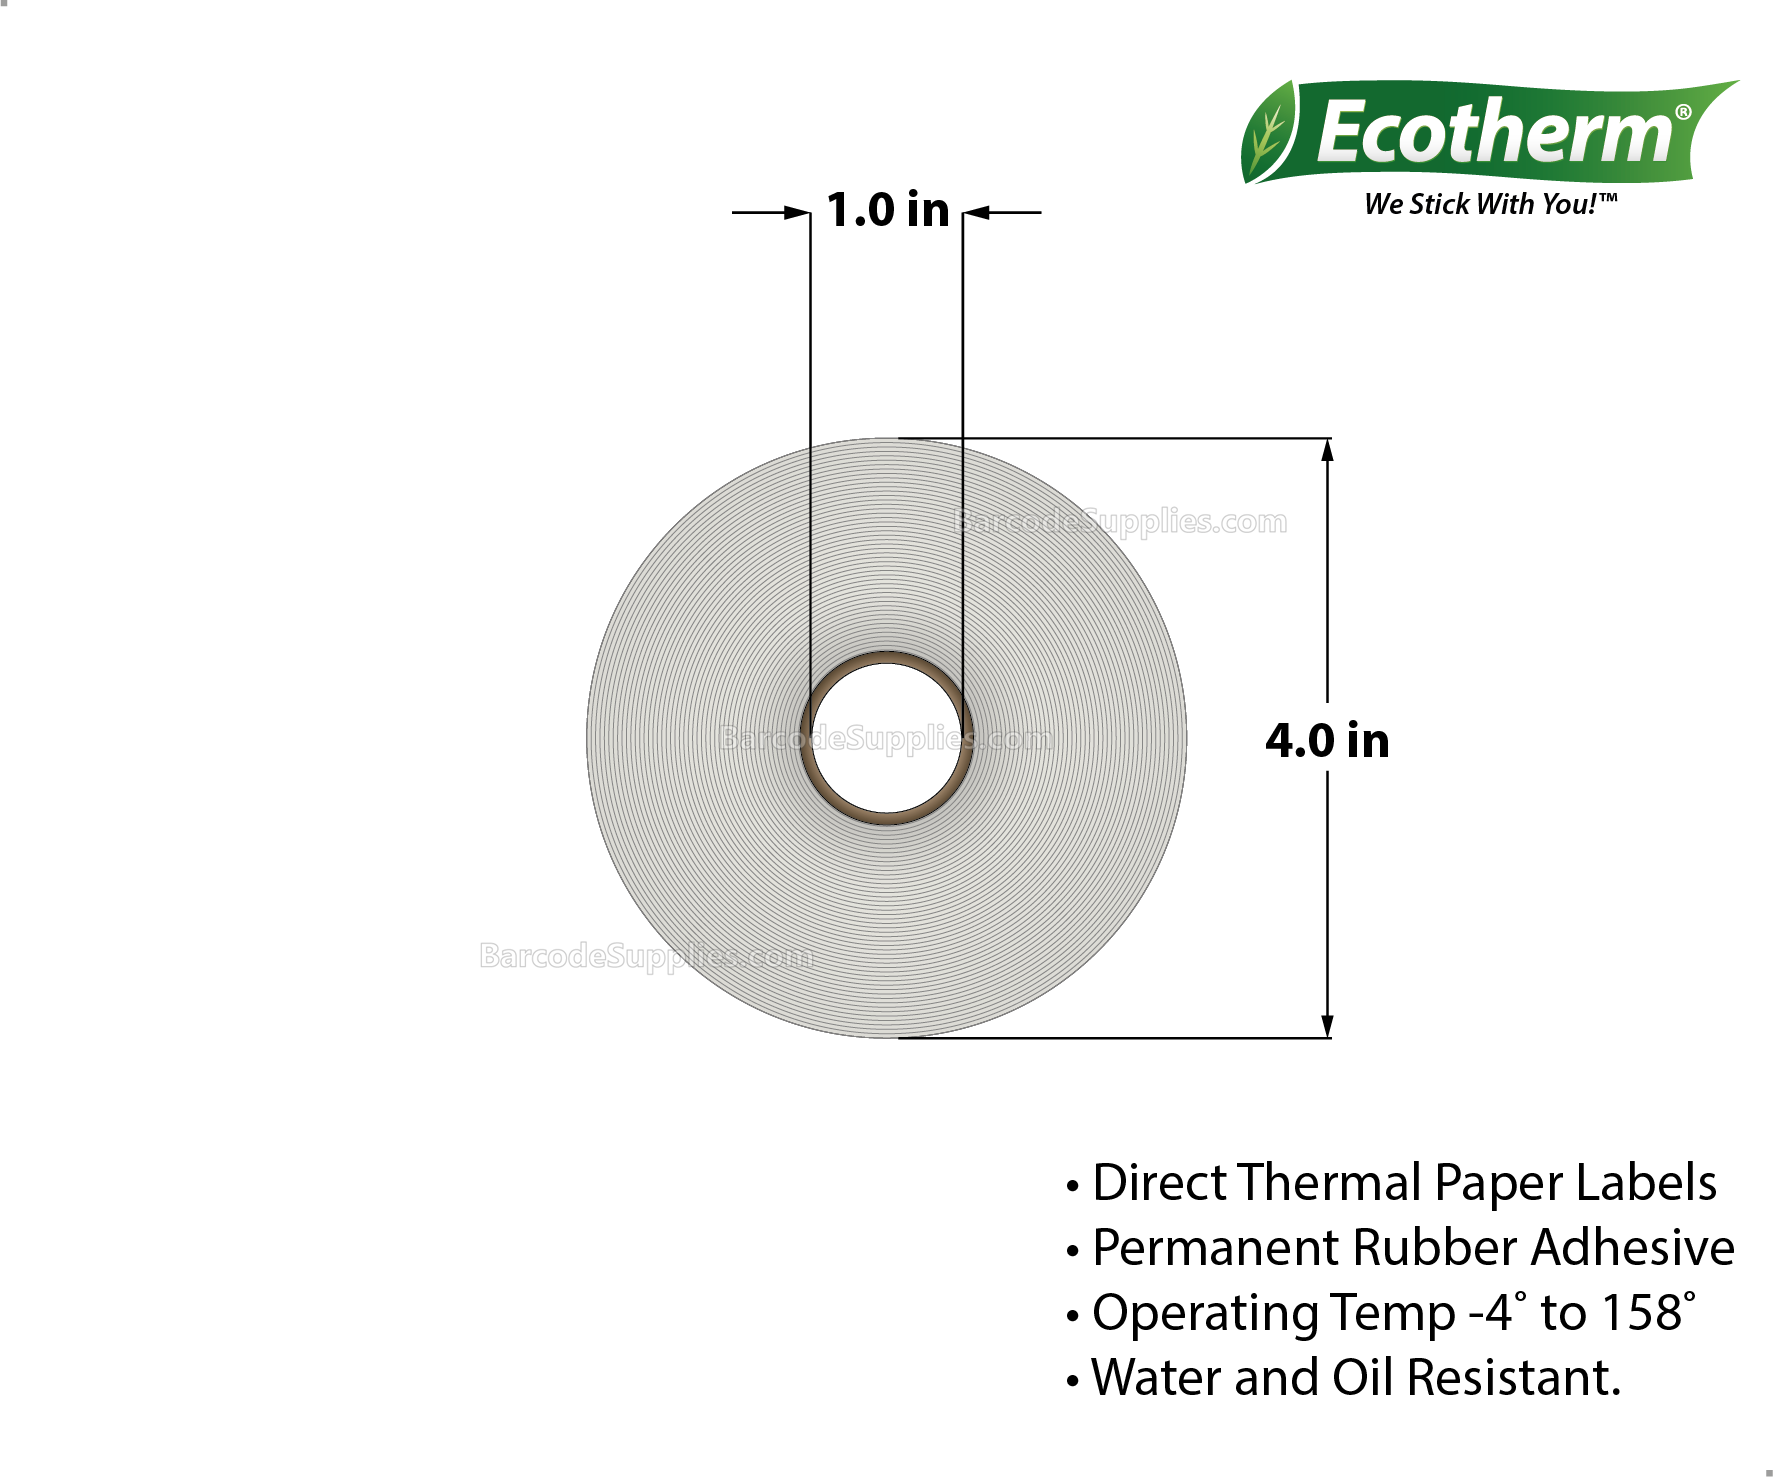 Products 2.25 x 2.5 Direct Thermal White Labels With Rubber Adhesive - Perforated - 600 Labels Per Roll - Carton Of 4 Rolls - 2400 Labels Total - MPN: ECOTHERM14135-4 - BarcodeSource, Inc.